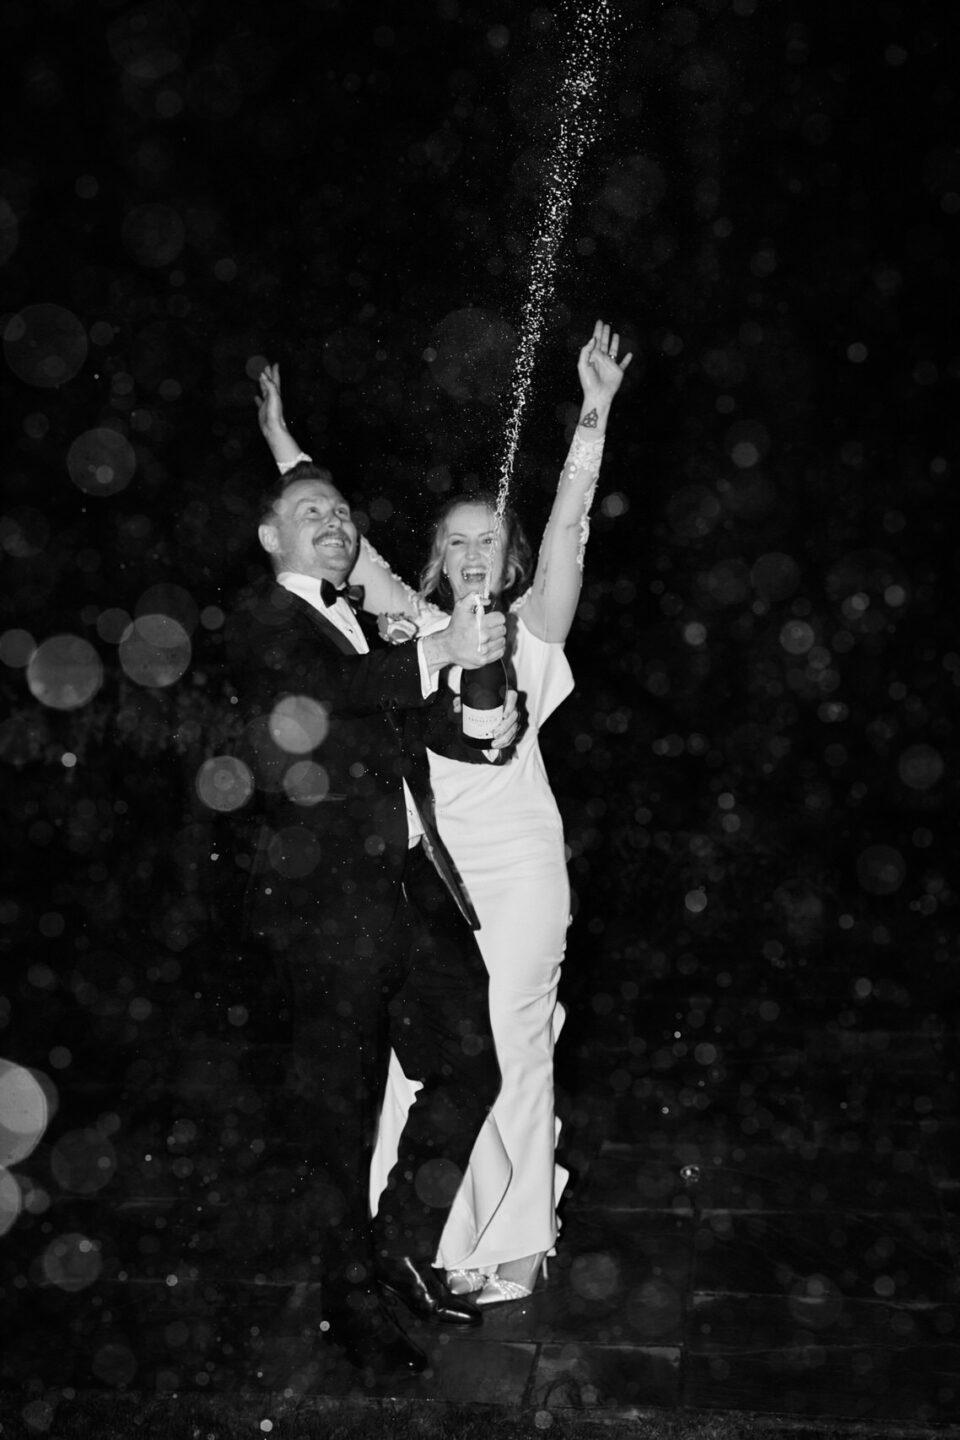 A picture in black and white showing a newlywed couple popping champagne.